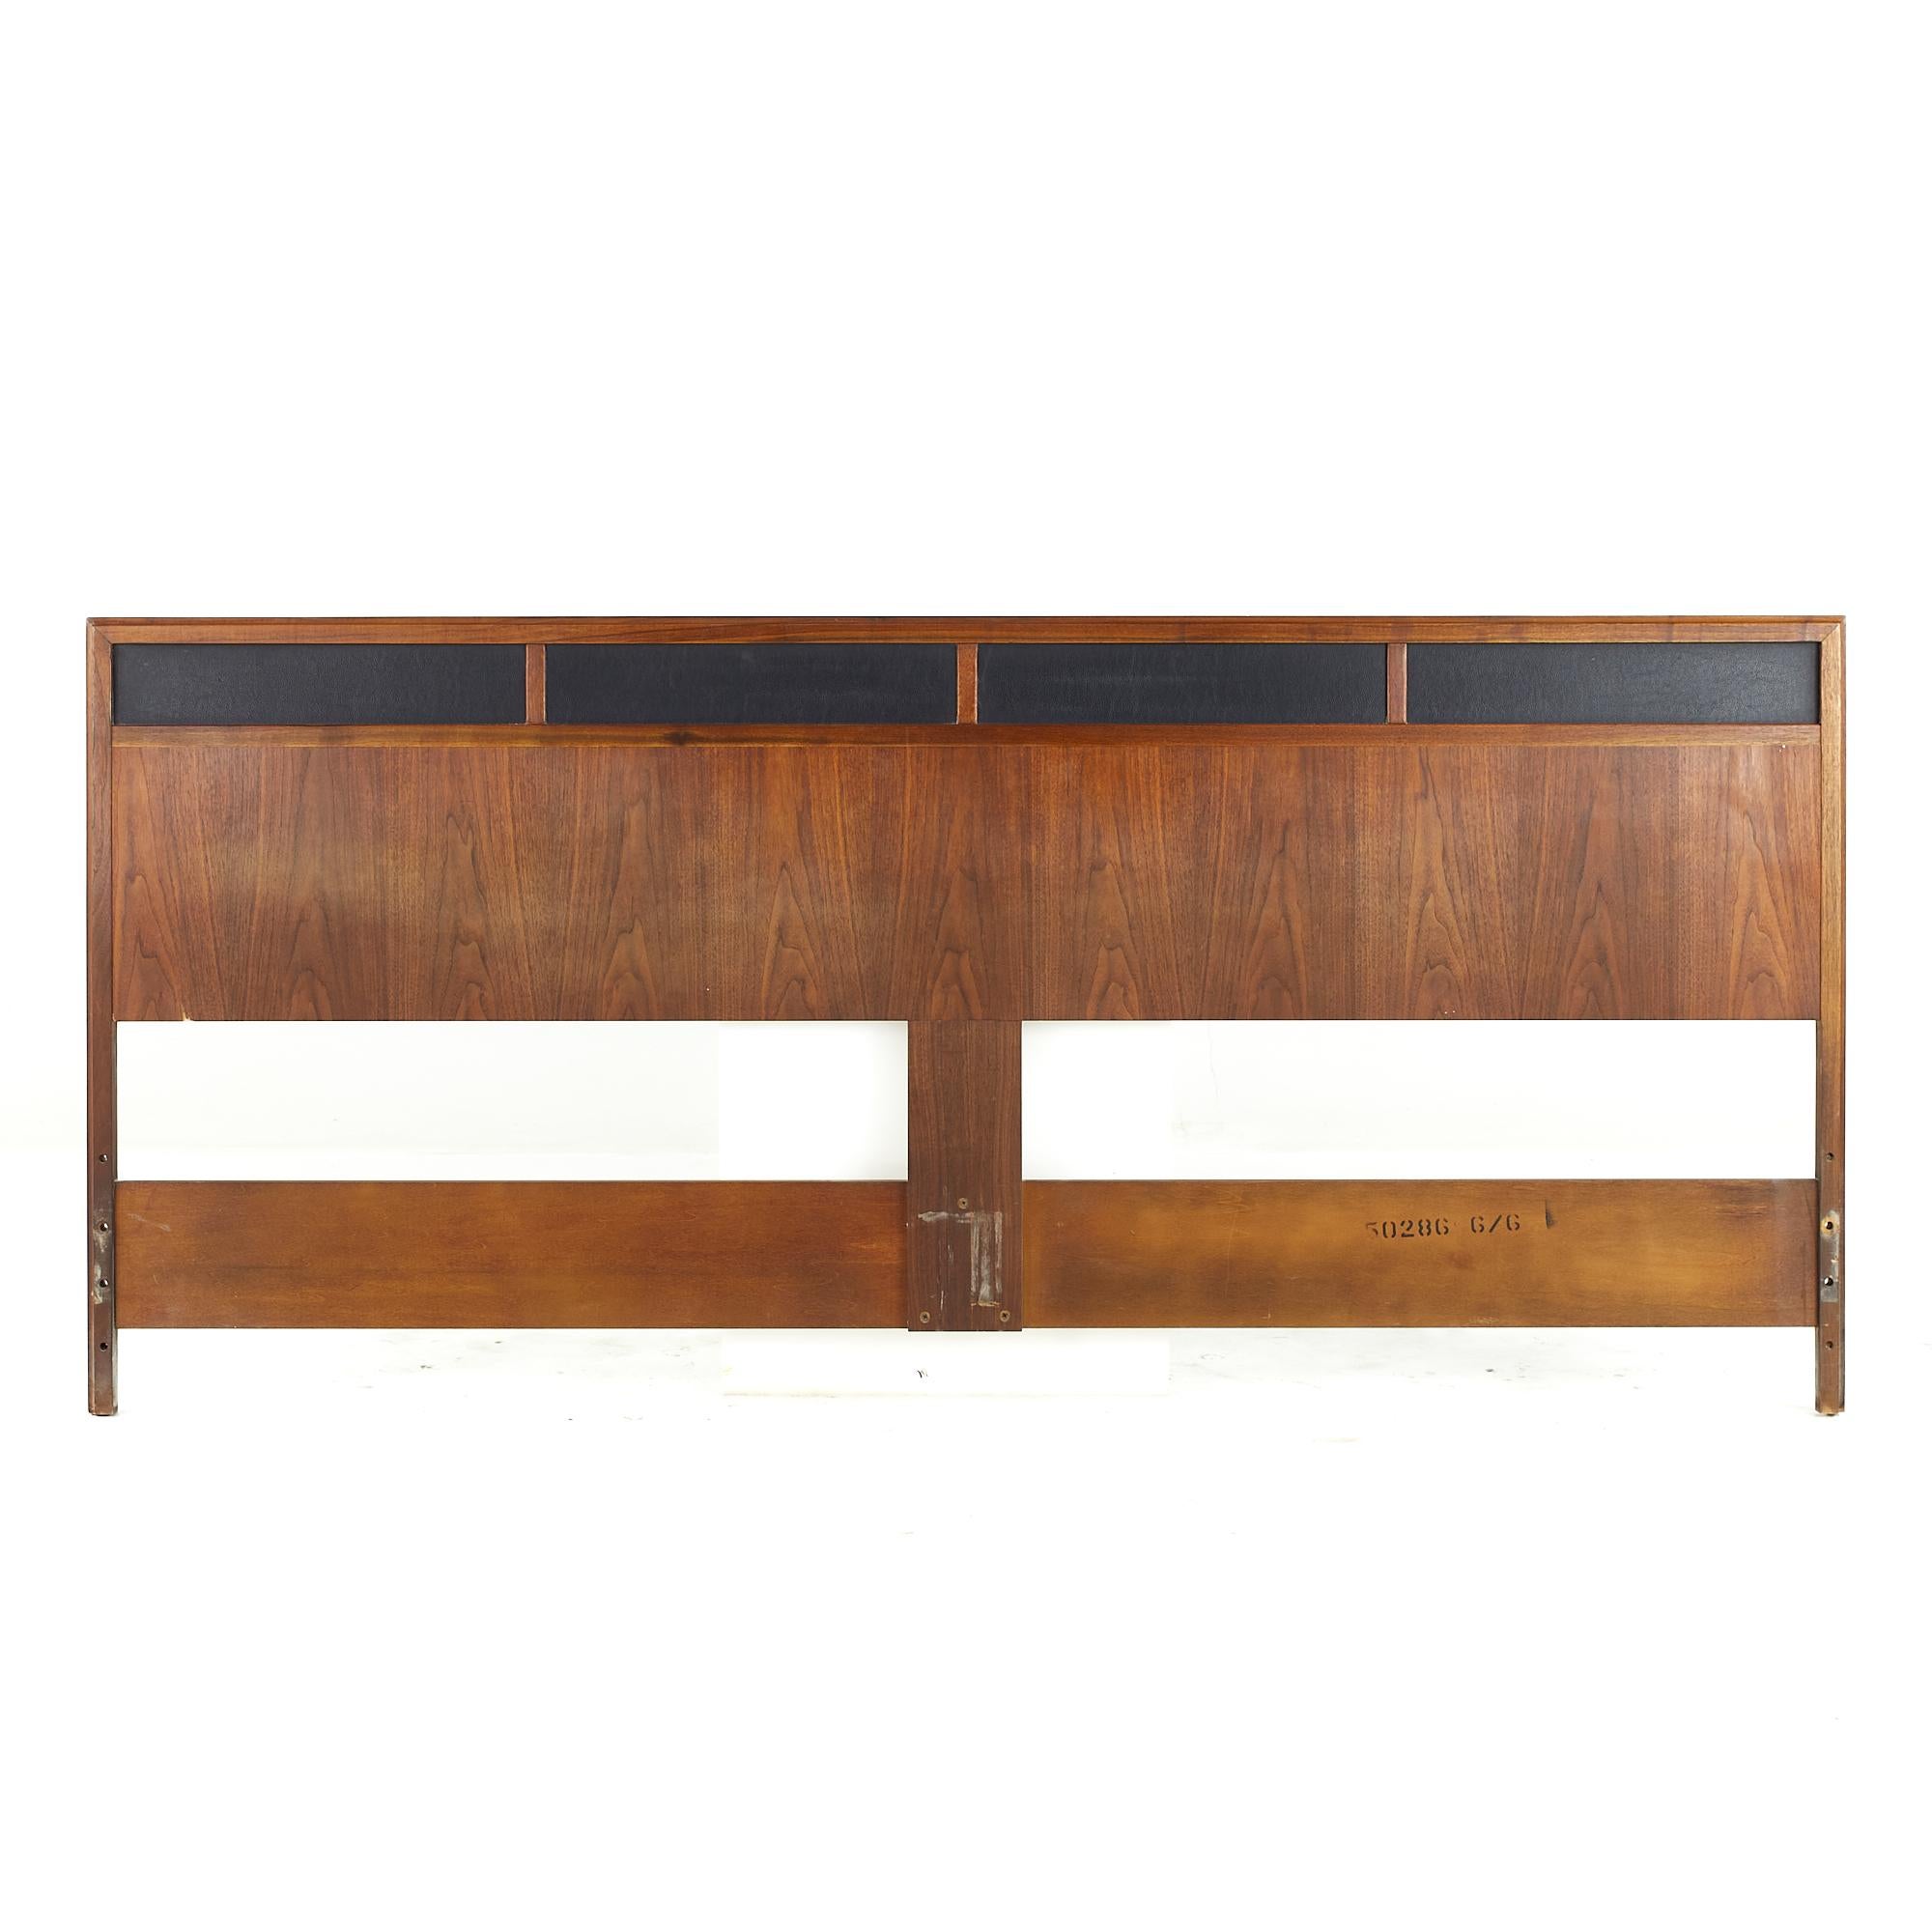 Jack Cartwright for Founders Mid Century King Headboard

 This headboard measures: 77.25 wide x 1.25 deep x 35 inches high

All pieces of furniture can be had in what we call restored vintage condition. That means the piece is restored upon